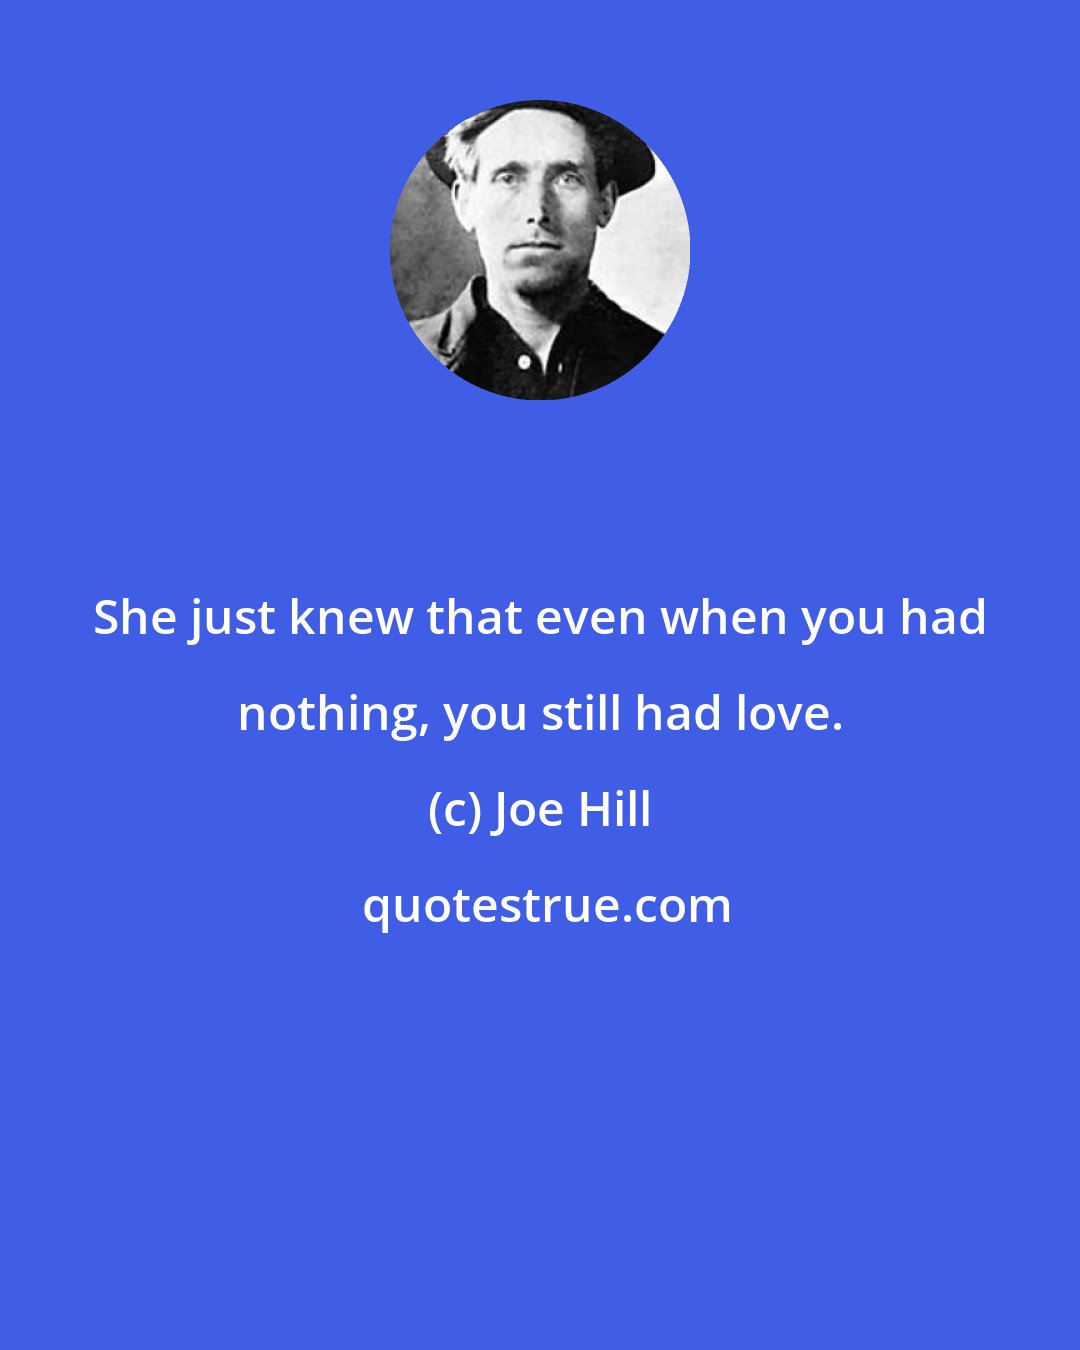 Joe Hill: She just knew that even when you had nothing, you still had love.